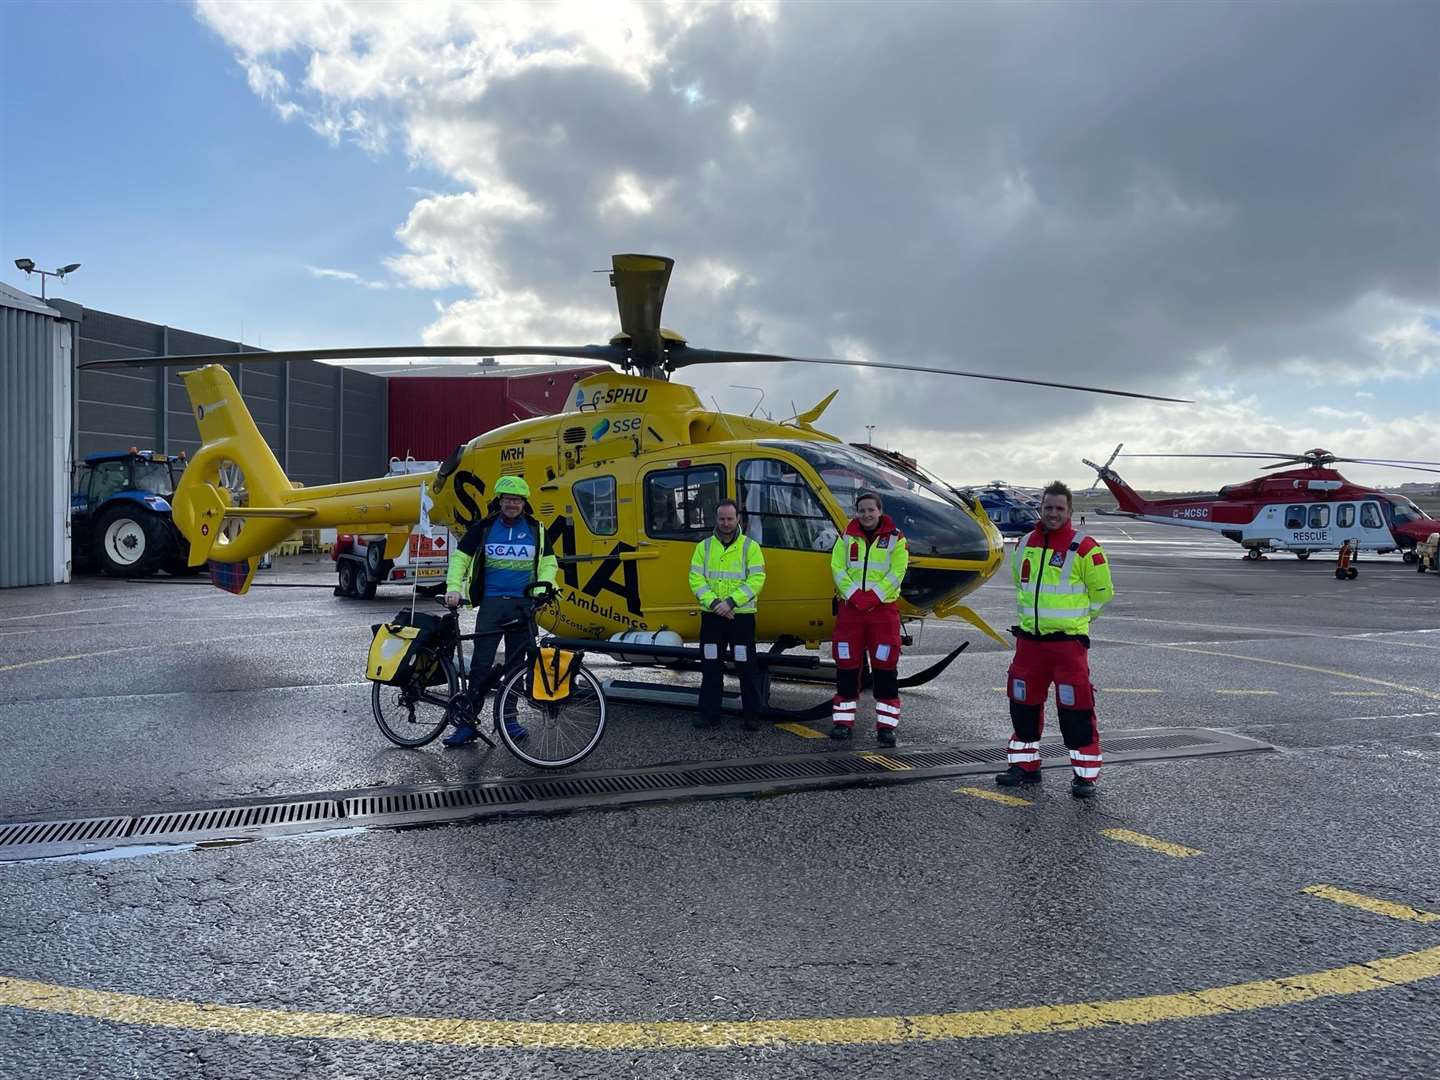 Barry Watt is to cycle from Land's End to John O' Groats to raise money for Scotland's charity air ambulance.